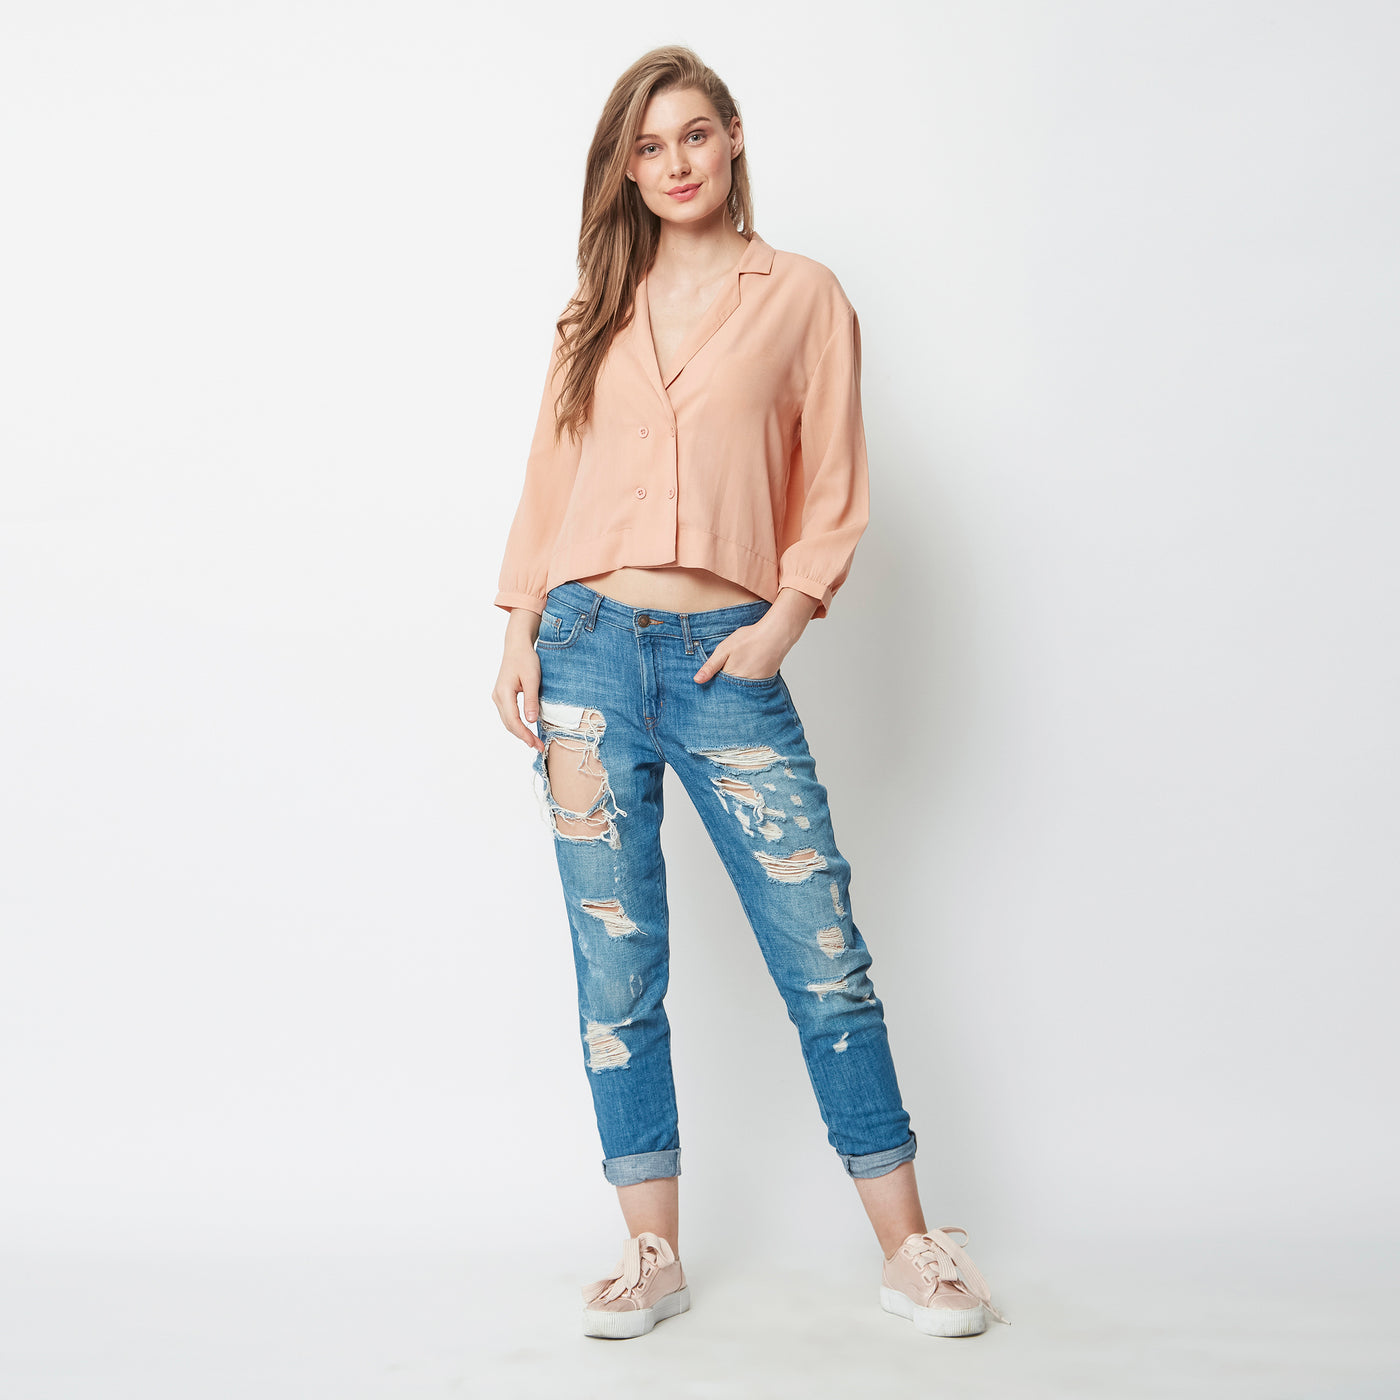 Cropped Out Peach Top